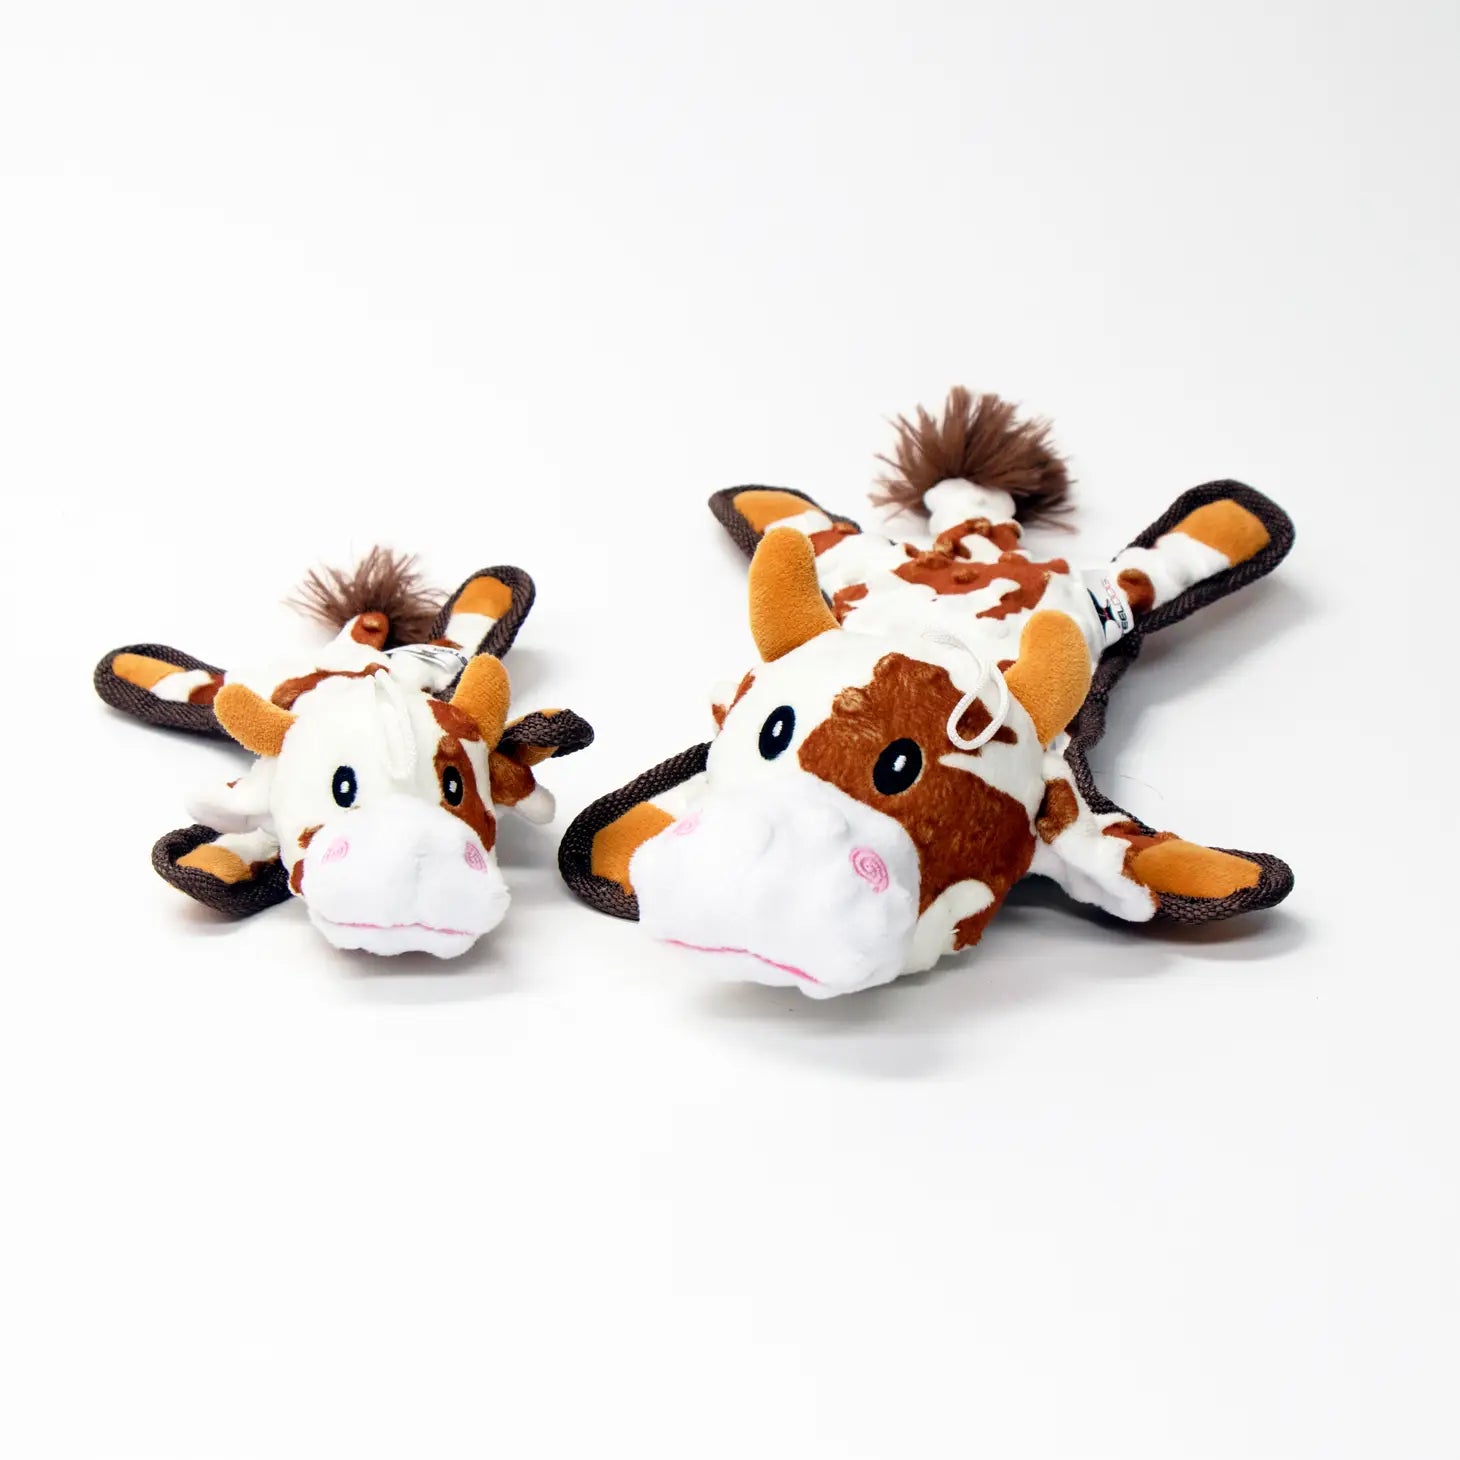 Two Bumpie Brown Cow Dog Toys laying on their stomachs. One Bumpie Brown Cow on the left is the small version of the dog toy. The Bumpie Brown Cow on the right is the standard version of the dog toy.